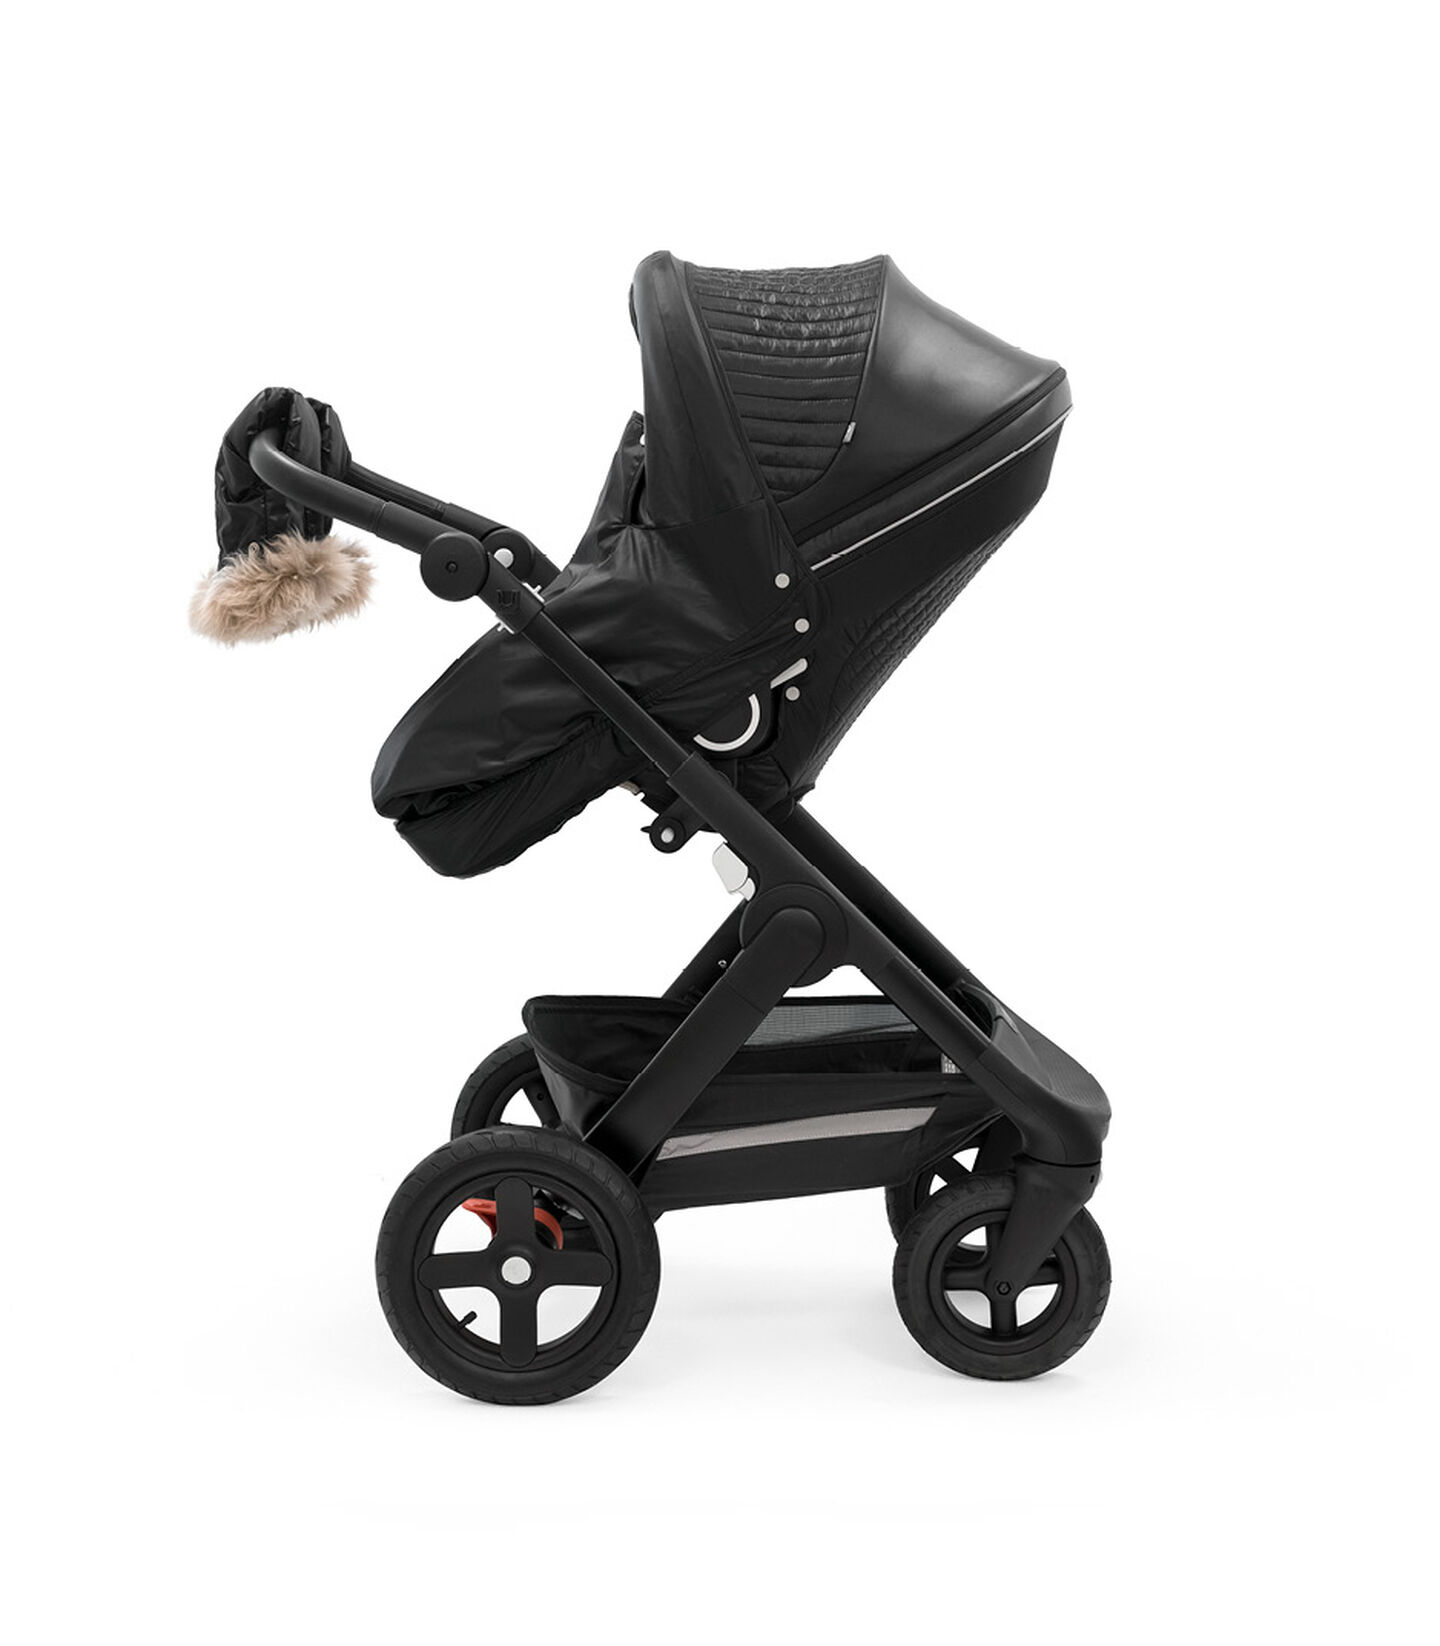 Stokke® Trailz™ Black Chassis with Stokke® Stroller Seat and Onyx Black Winter Kit. view 1